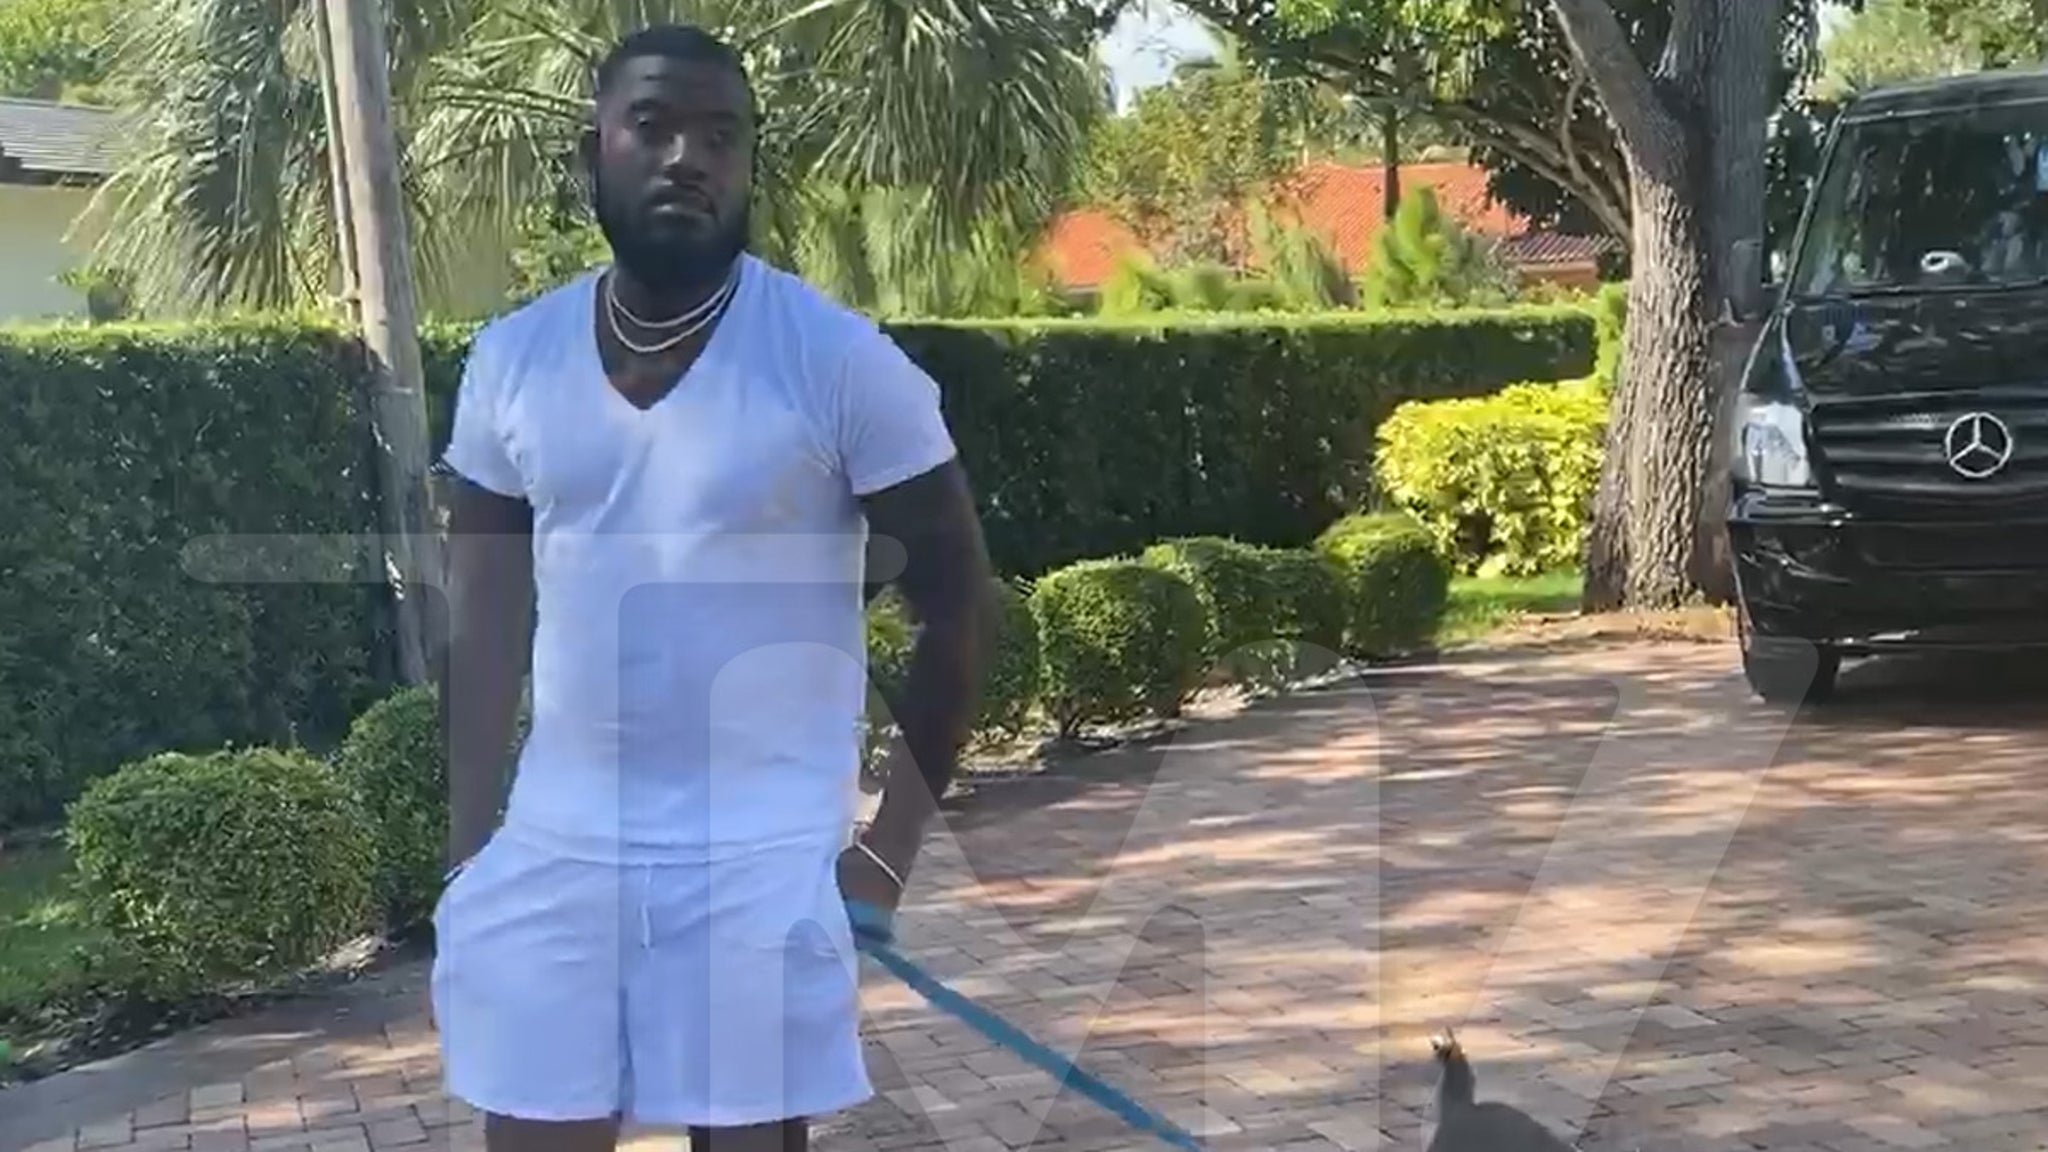 Ray J buys a goat to celebrate the milestone in headphone sales